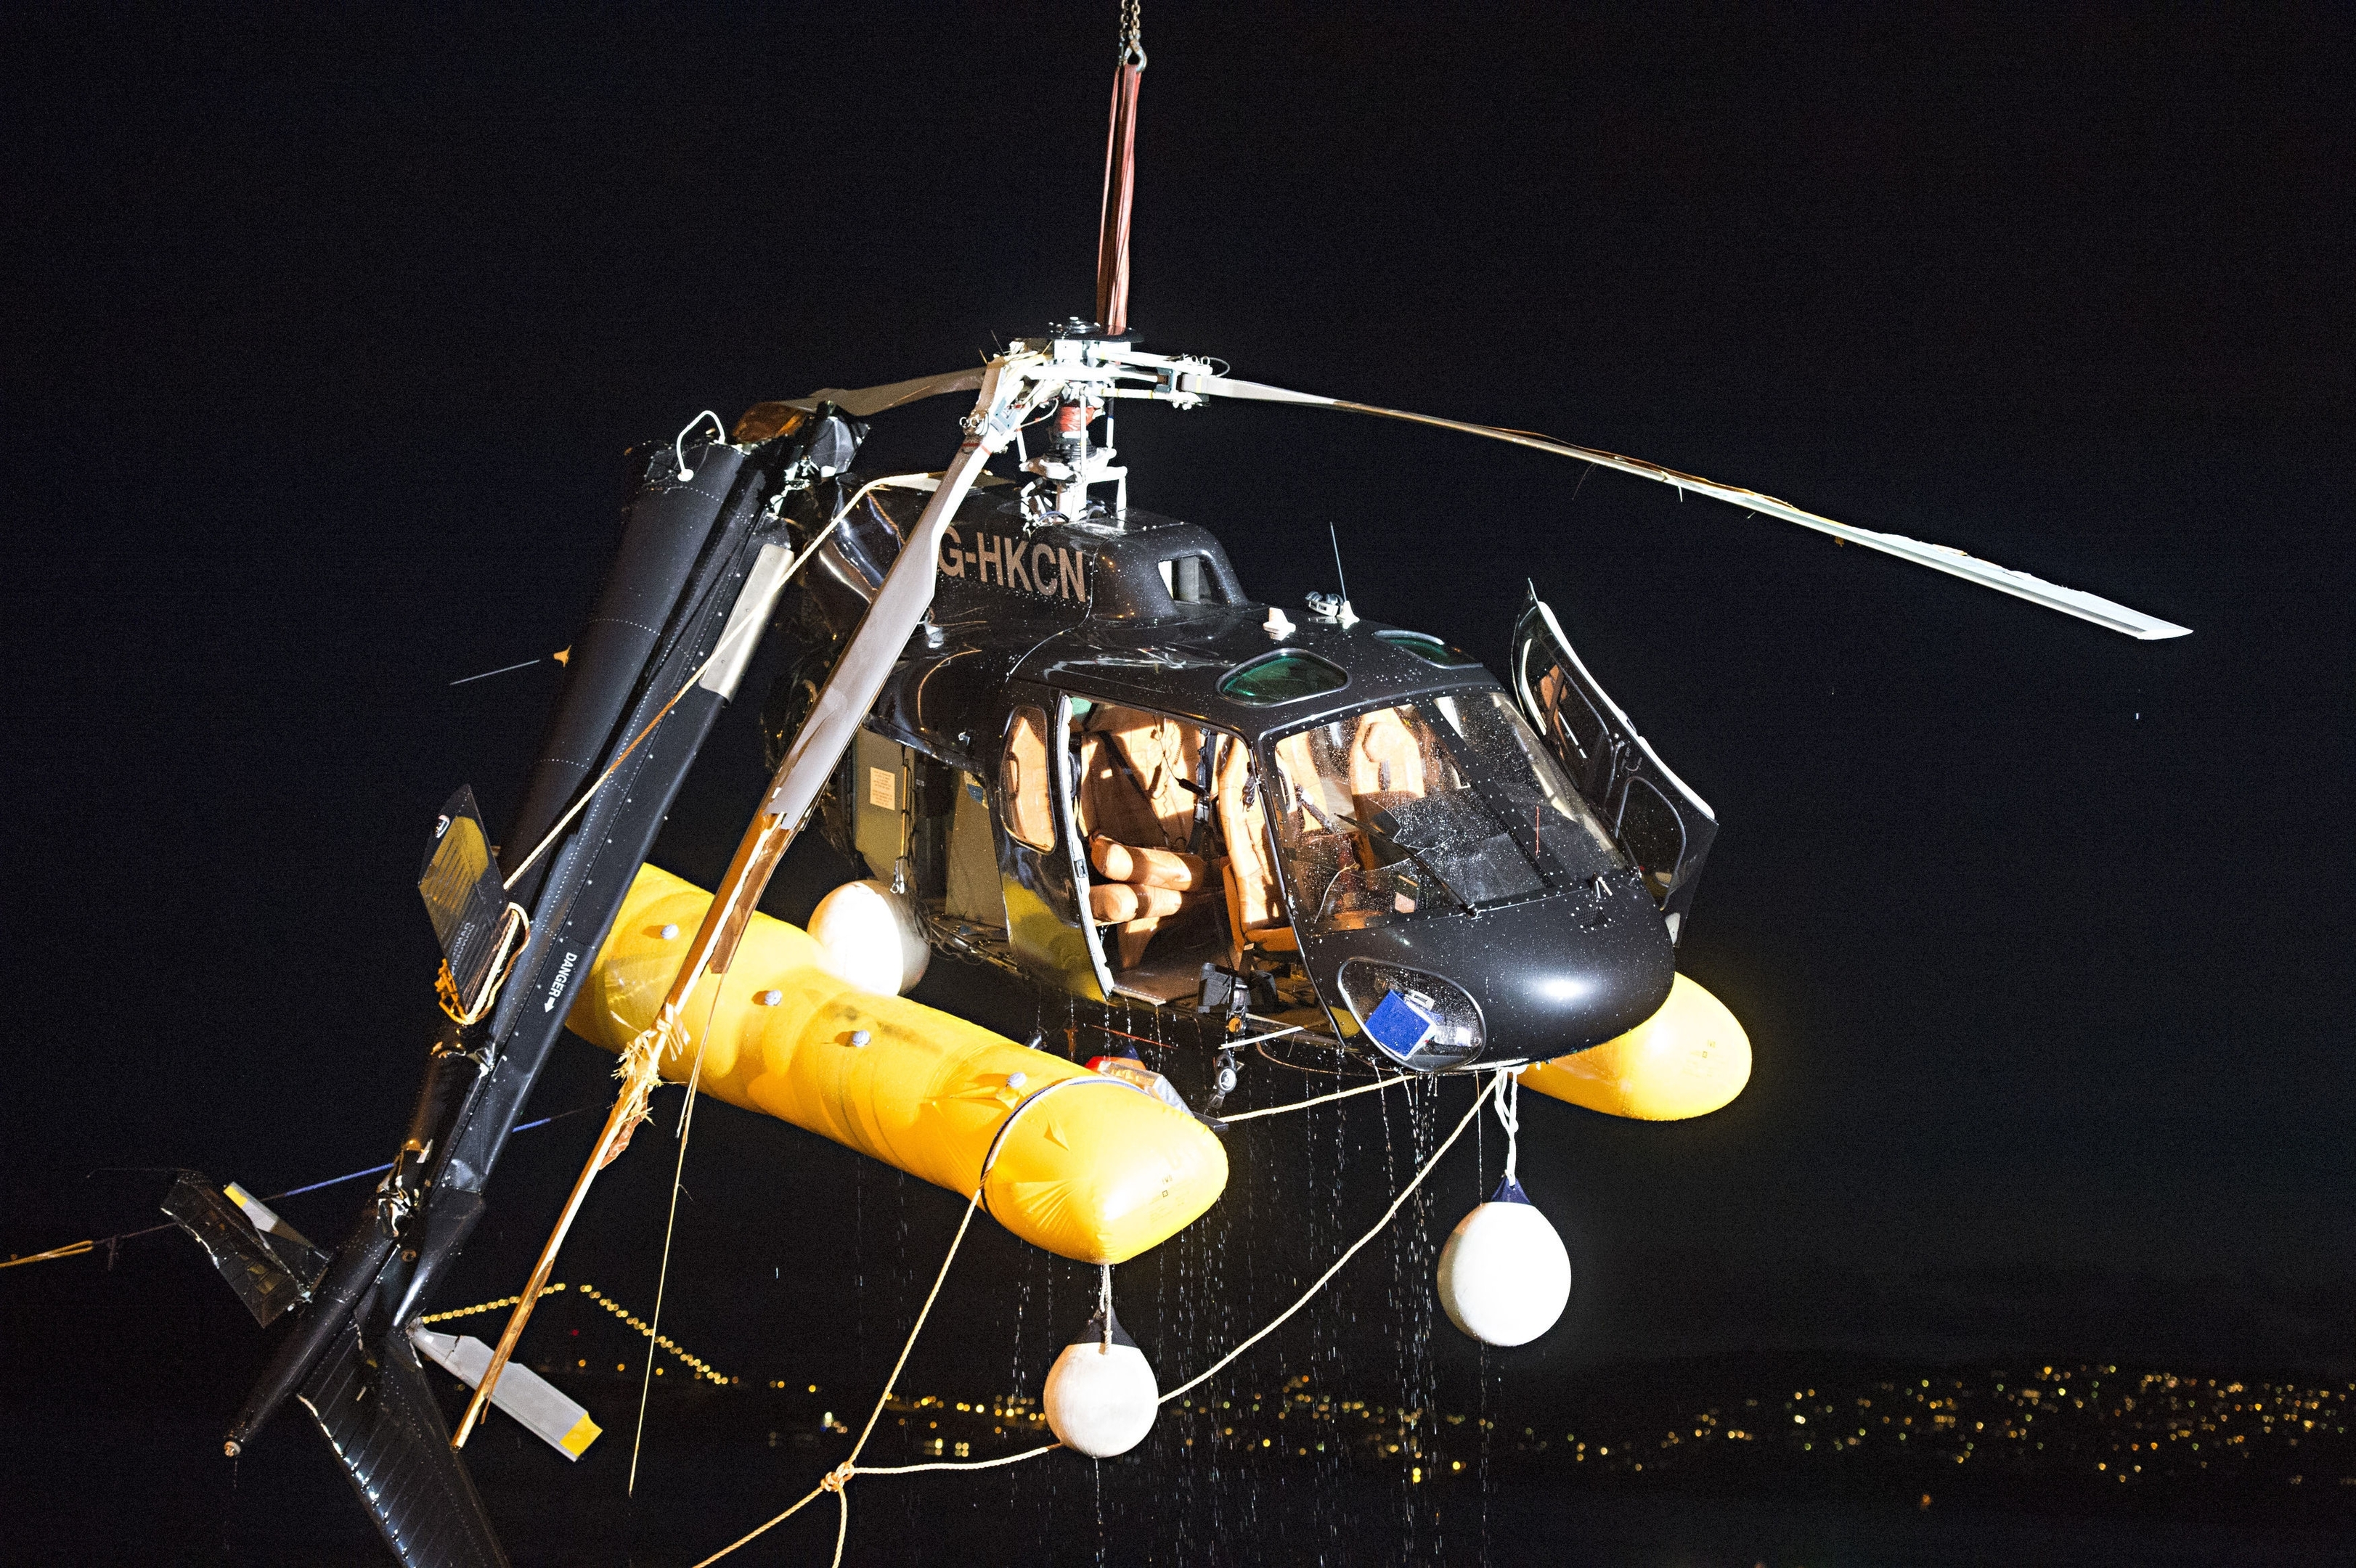 A helicopter which crashed into the sea near Bergen harbour, western Norway, is seen being lifted out from the water in the early hours of Thursday May 11, 2017.